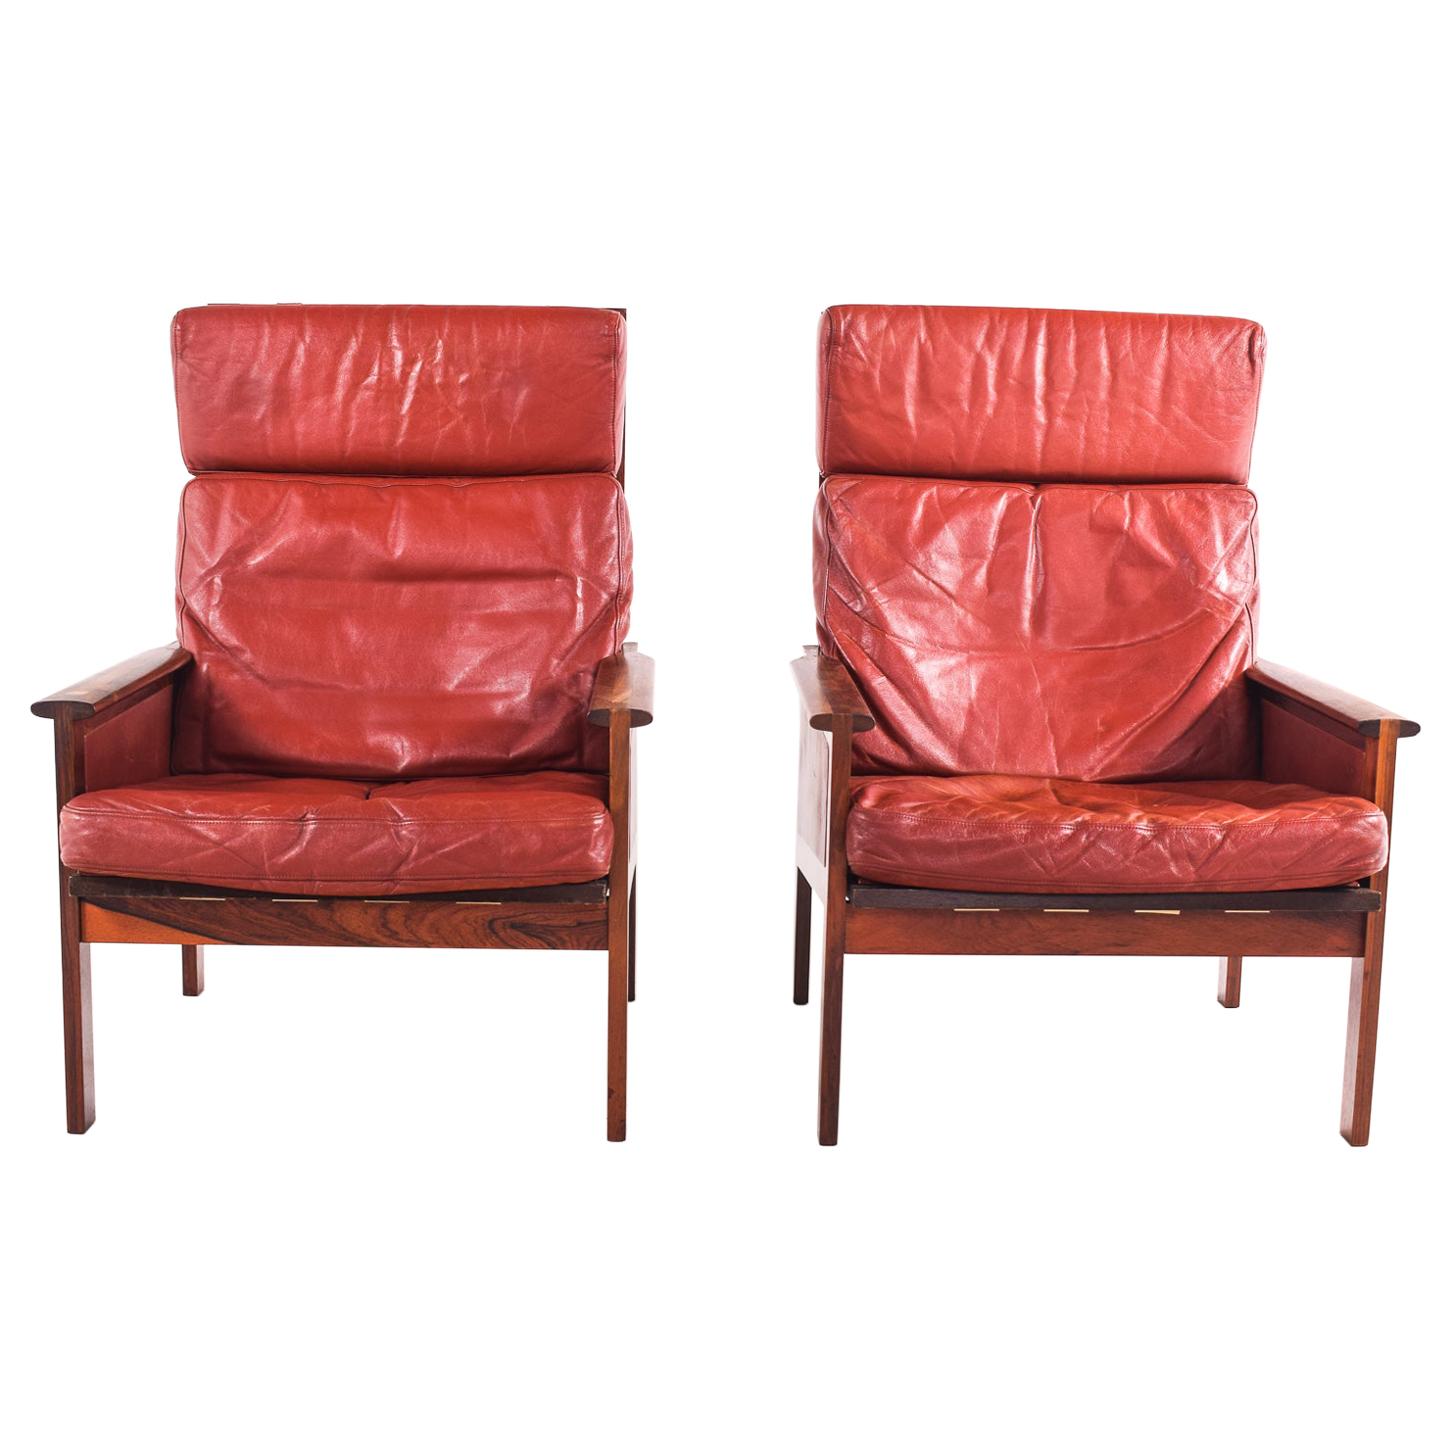 Pair of Rosewood Capella 'High Back' Armchairs by Illum Wikkelso for Eilersen